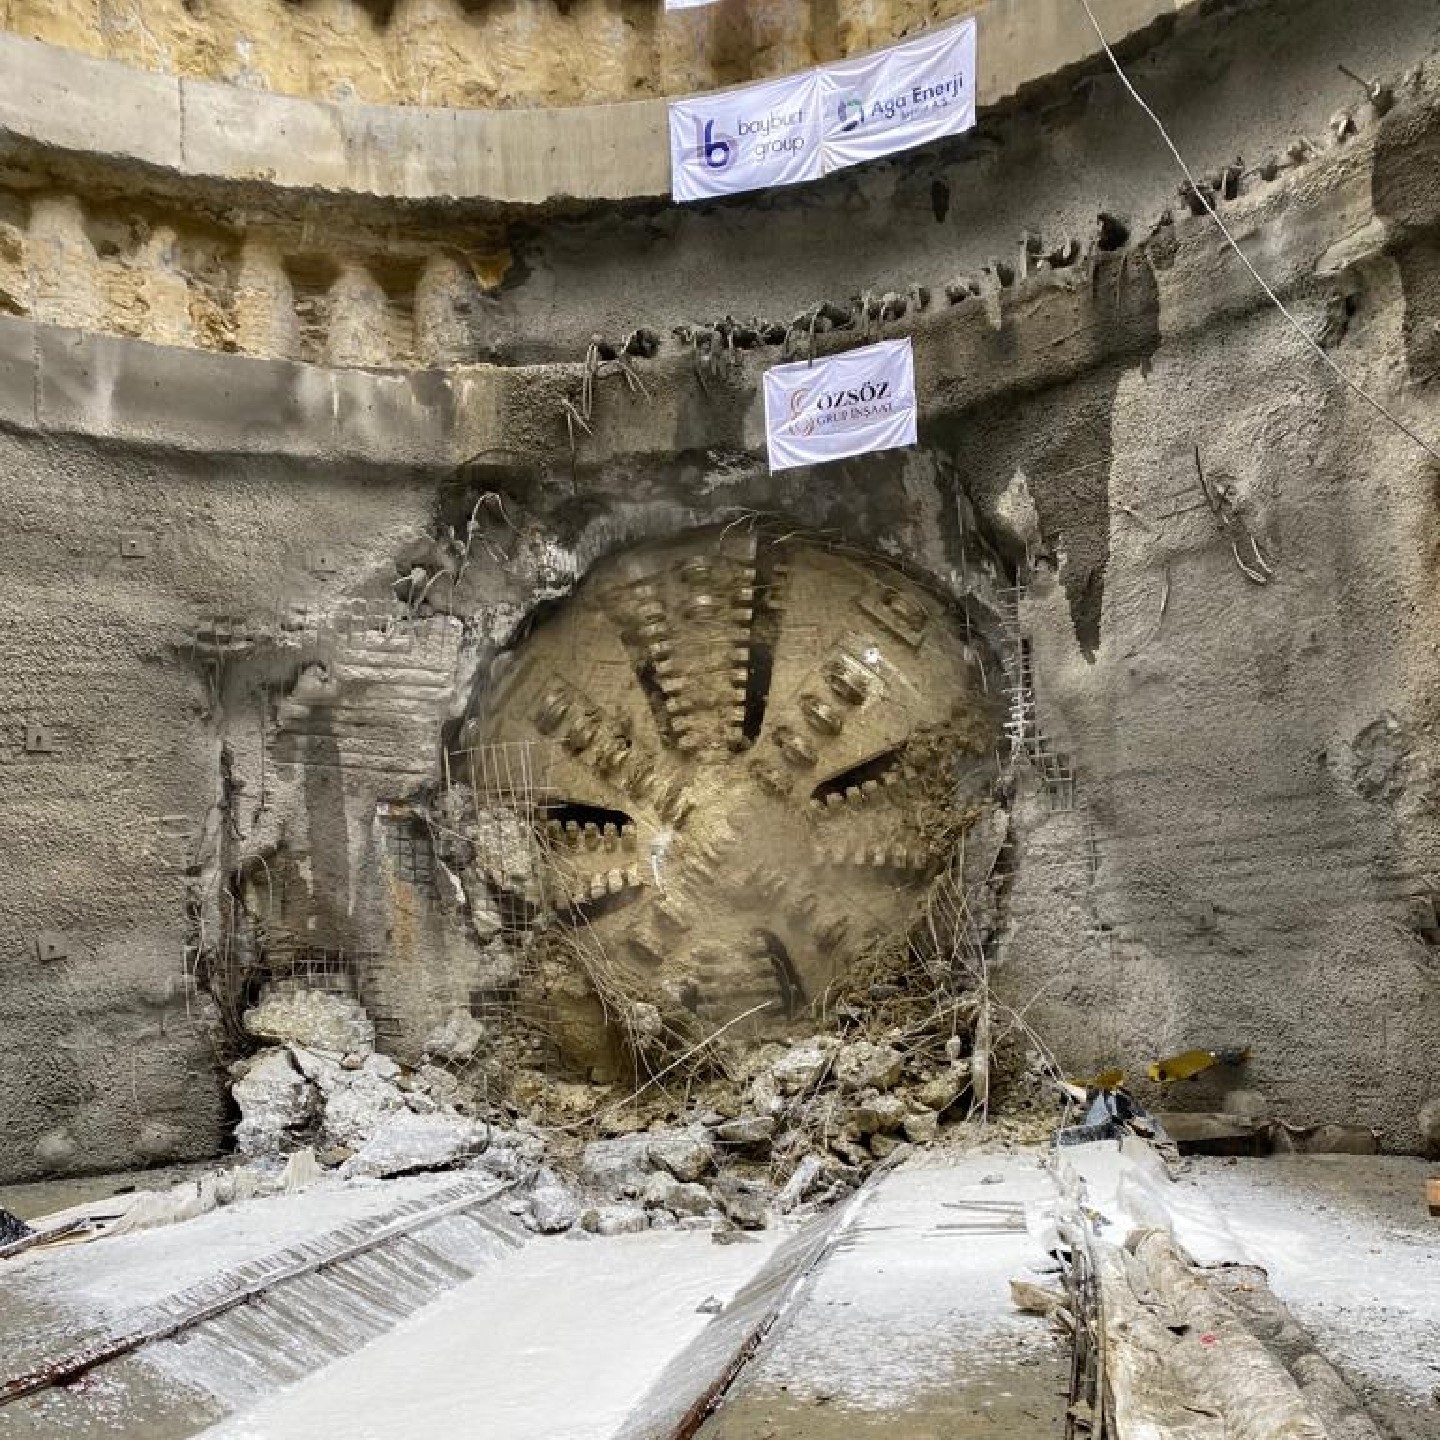 A great success for Aga Enerji Nakliyat Madencilik Insaat Sanayi Ticaret A.S., who recently completed a 6.67km and a 6.61km long tunnel as part of the Istanbul Metro Project in Türkyie. 

Two Herrenknecht EPB shields with a diameter of 6.57m have been us